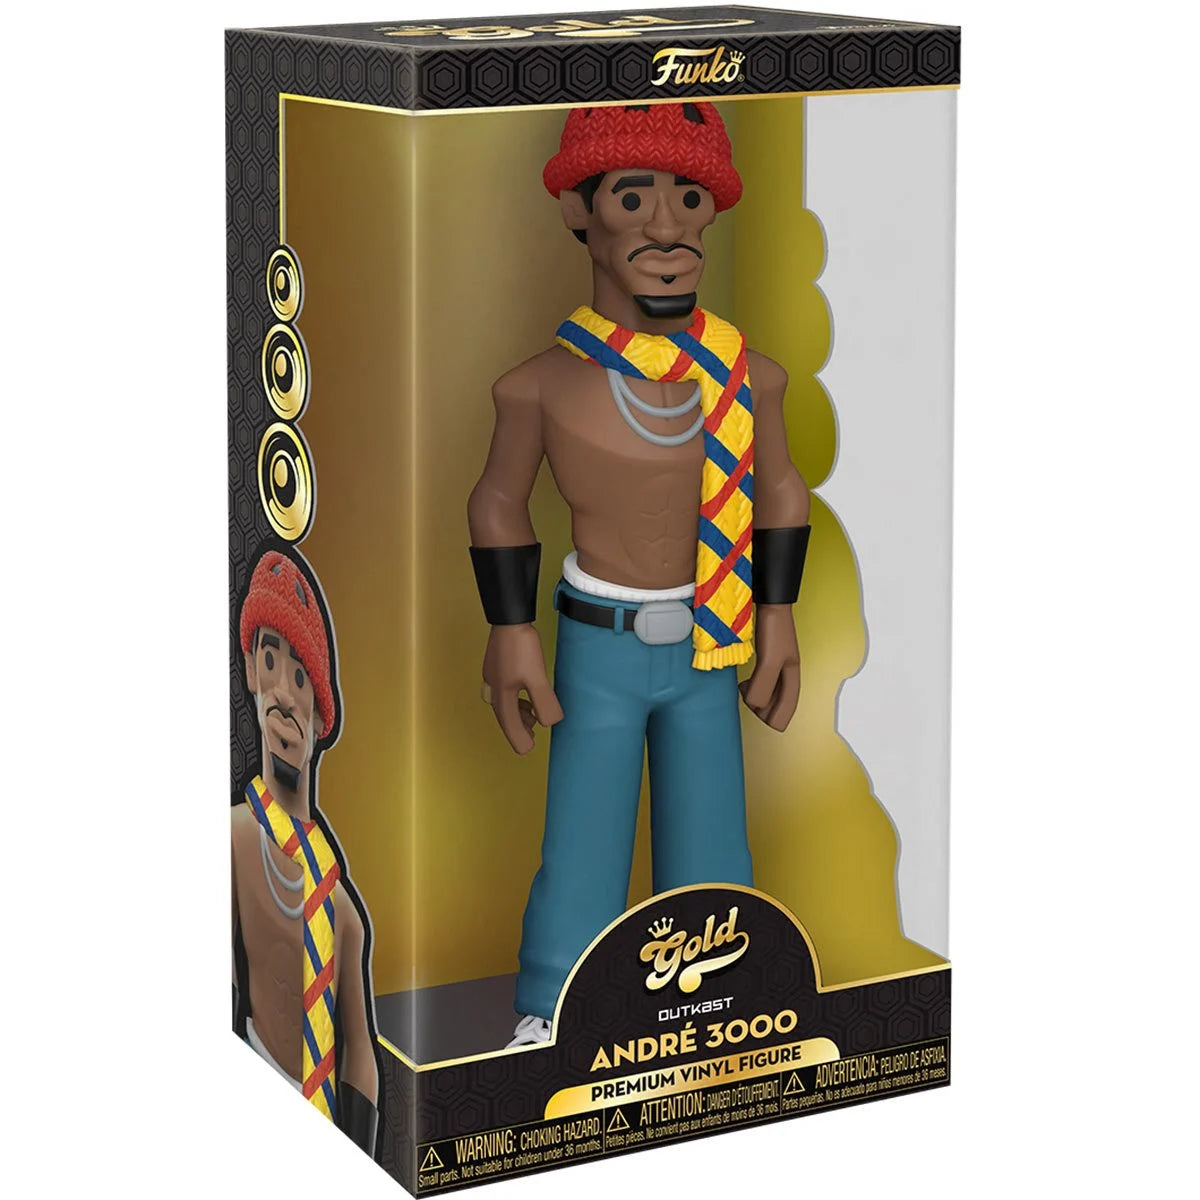 Andre 3000 (Ms. Jackson) Outkast 12-Inch Funko Vinyl Gold Figure